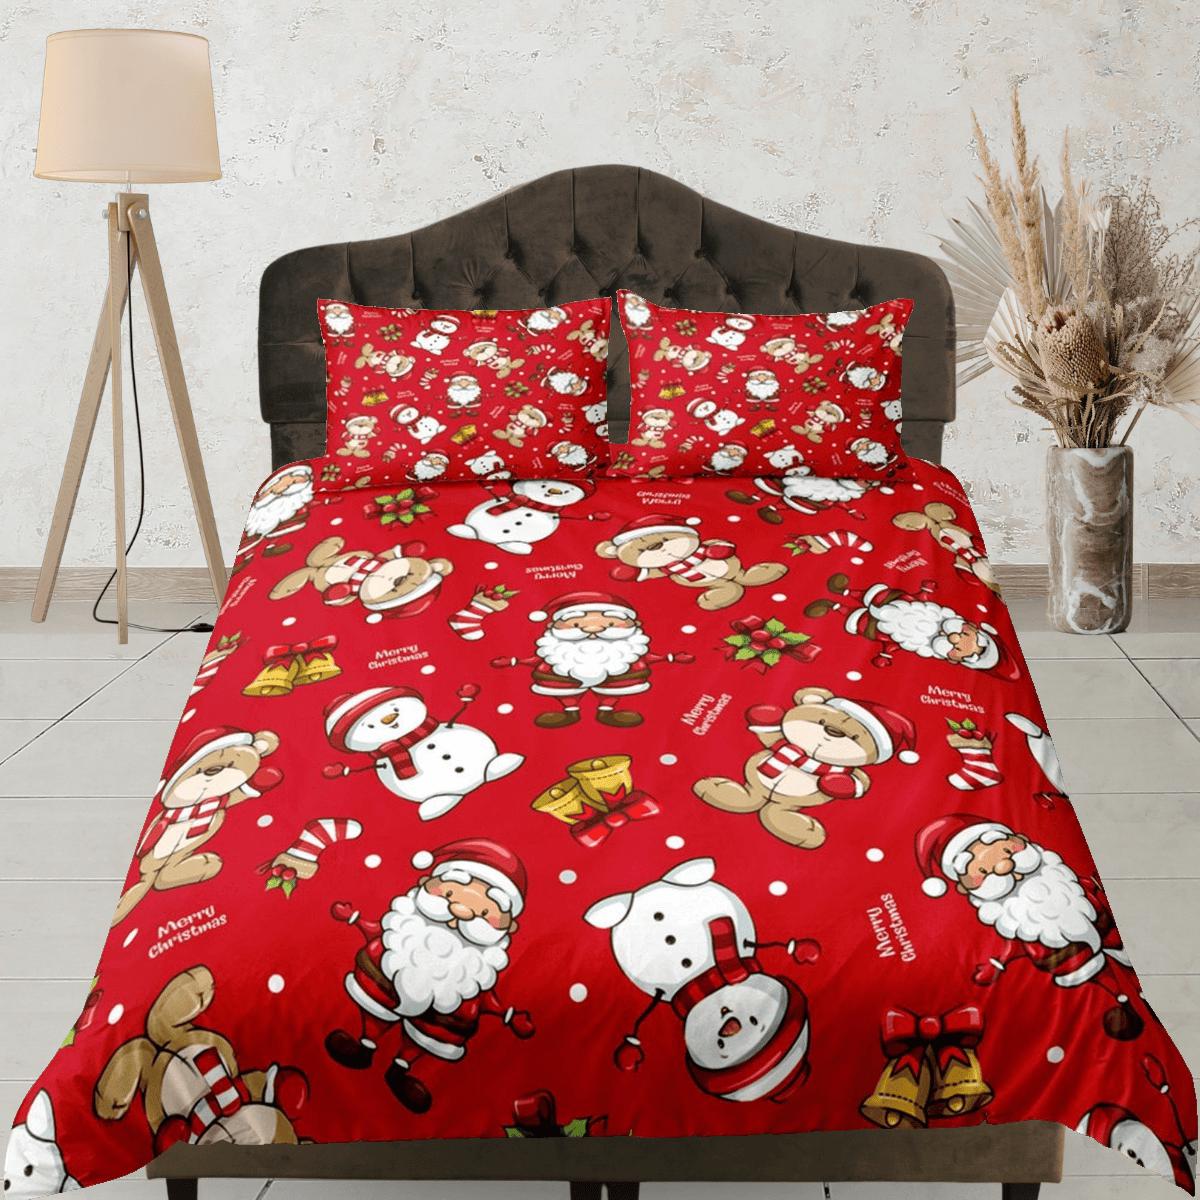 daintyduvet Teddy bear and santa claus red duvet cover set, christmas full size bedding & pillowcase, college bedding, toddler bedding, holiday gift